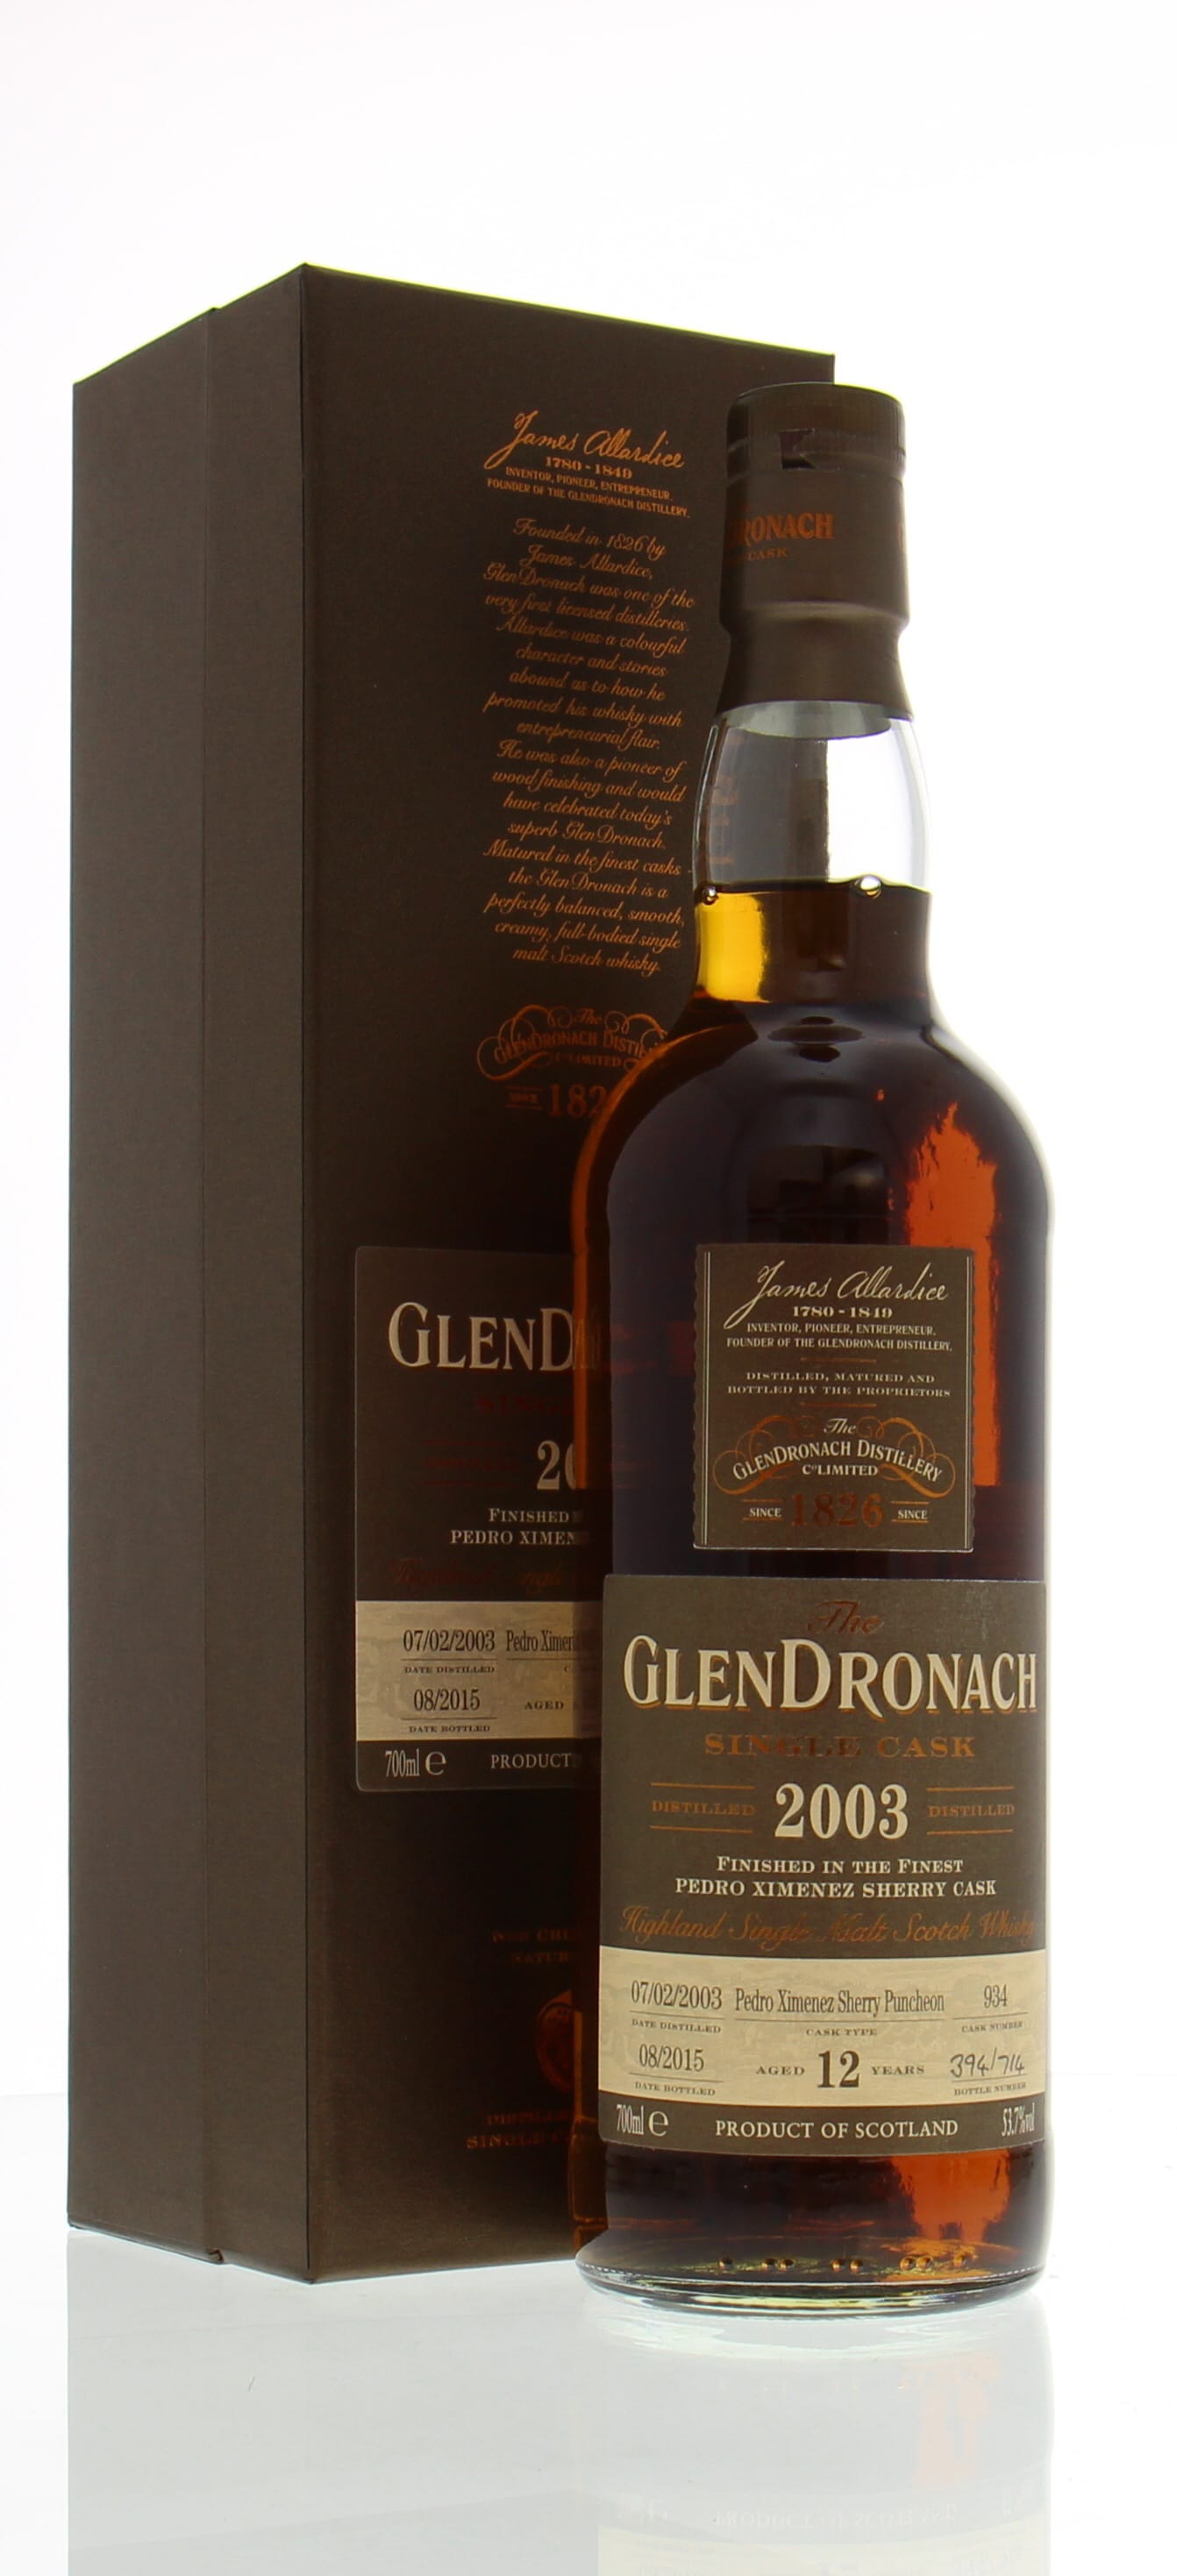 Glendronach - 12 Years Old Batch 12 Pedro Ximénez Sherry Puncheon Cask:934 1 of 714 Bottles 53.7% 2003 In Original Container